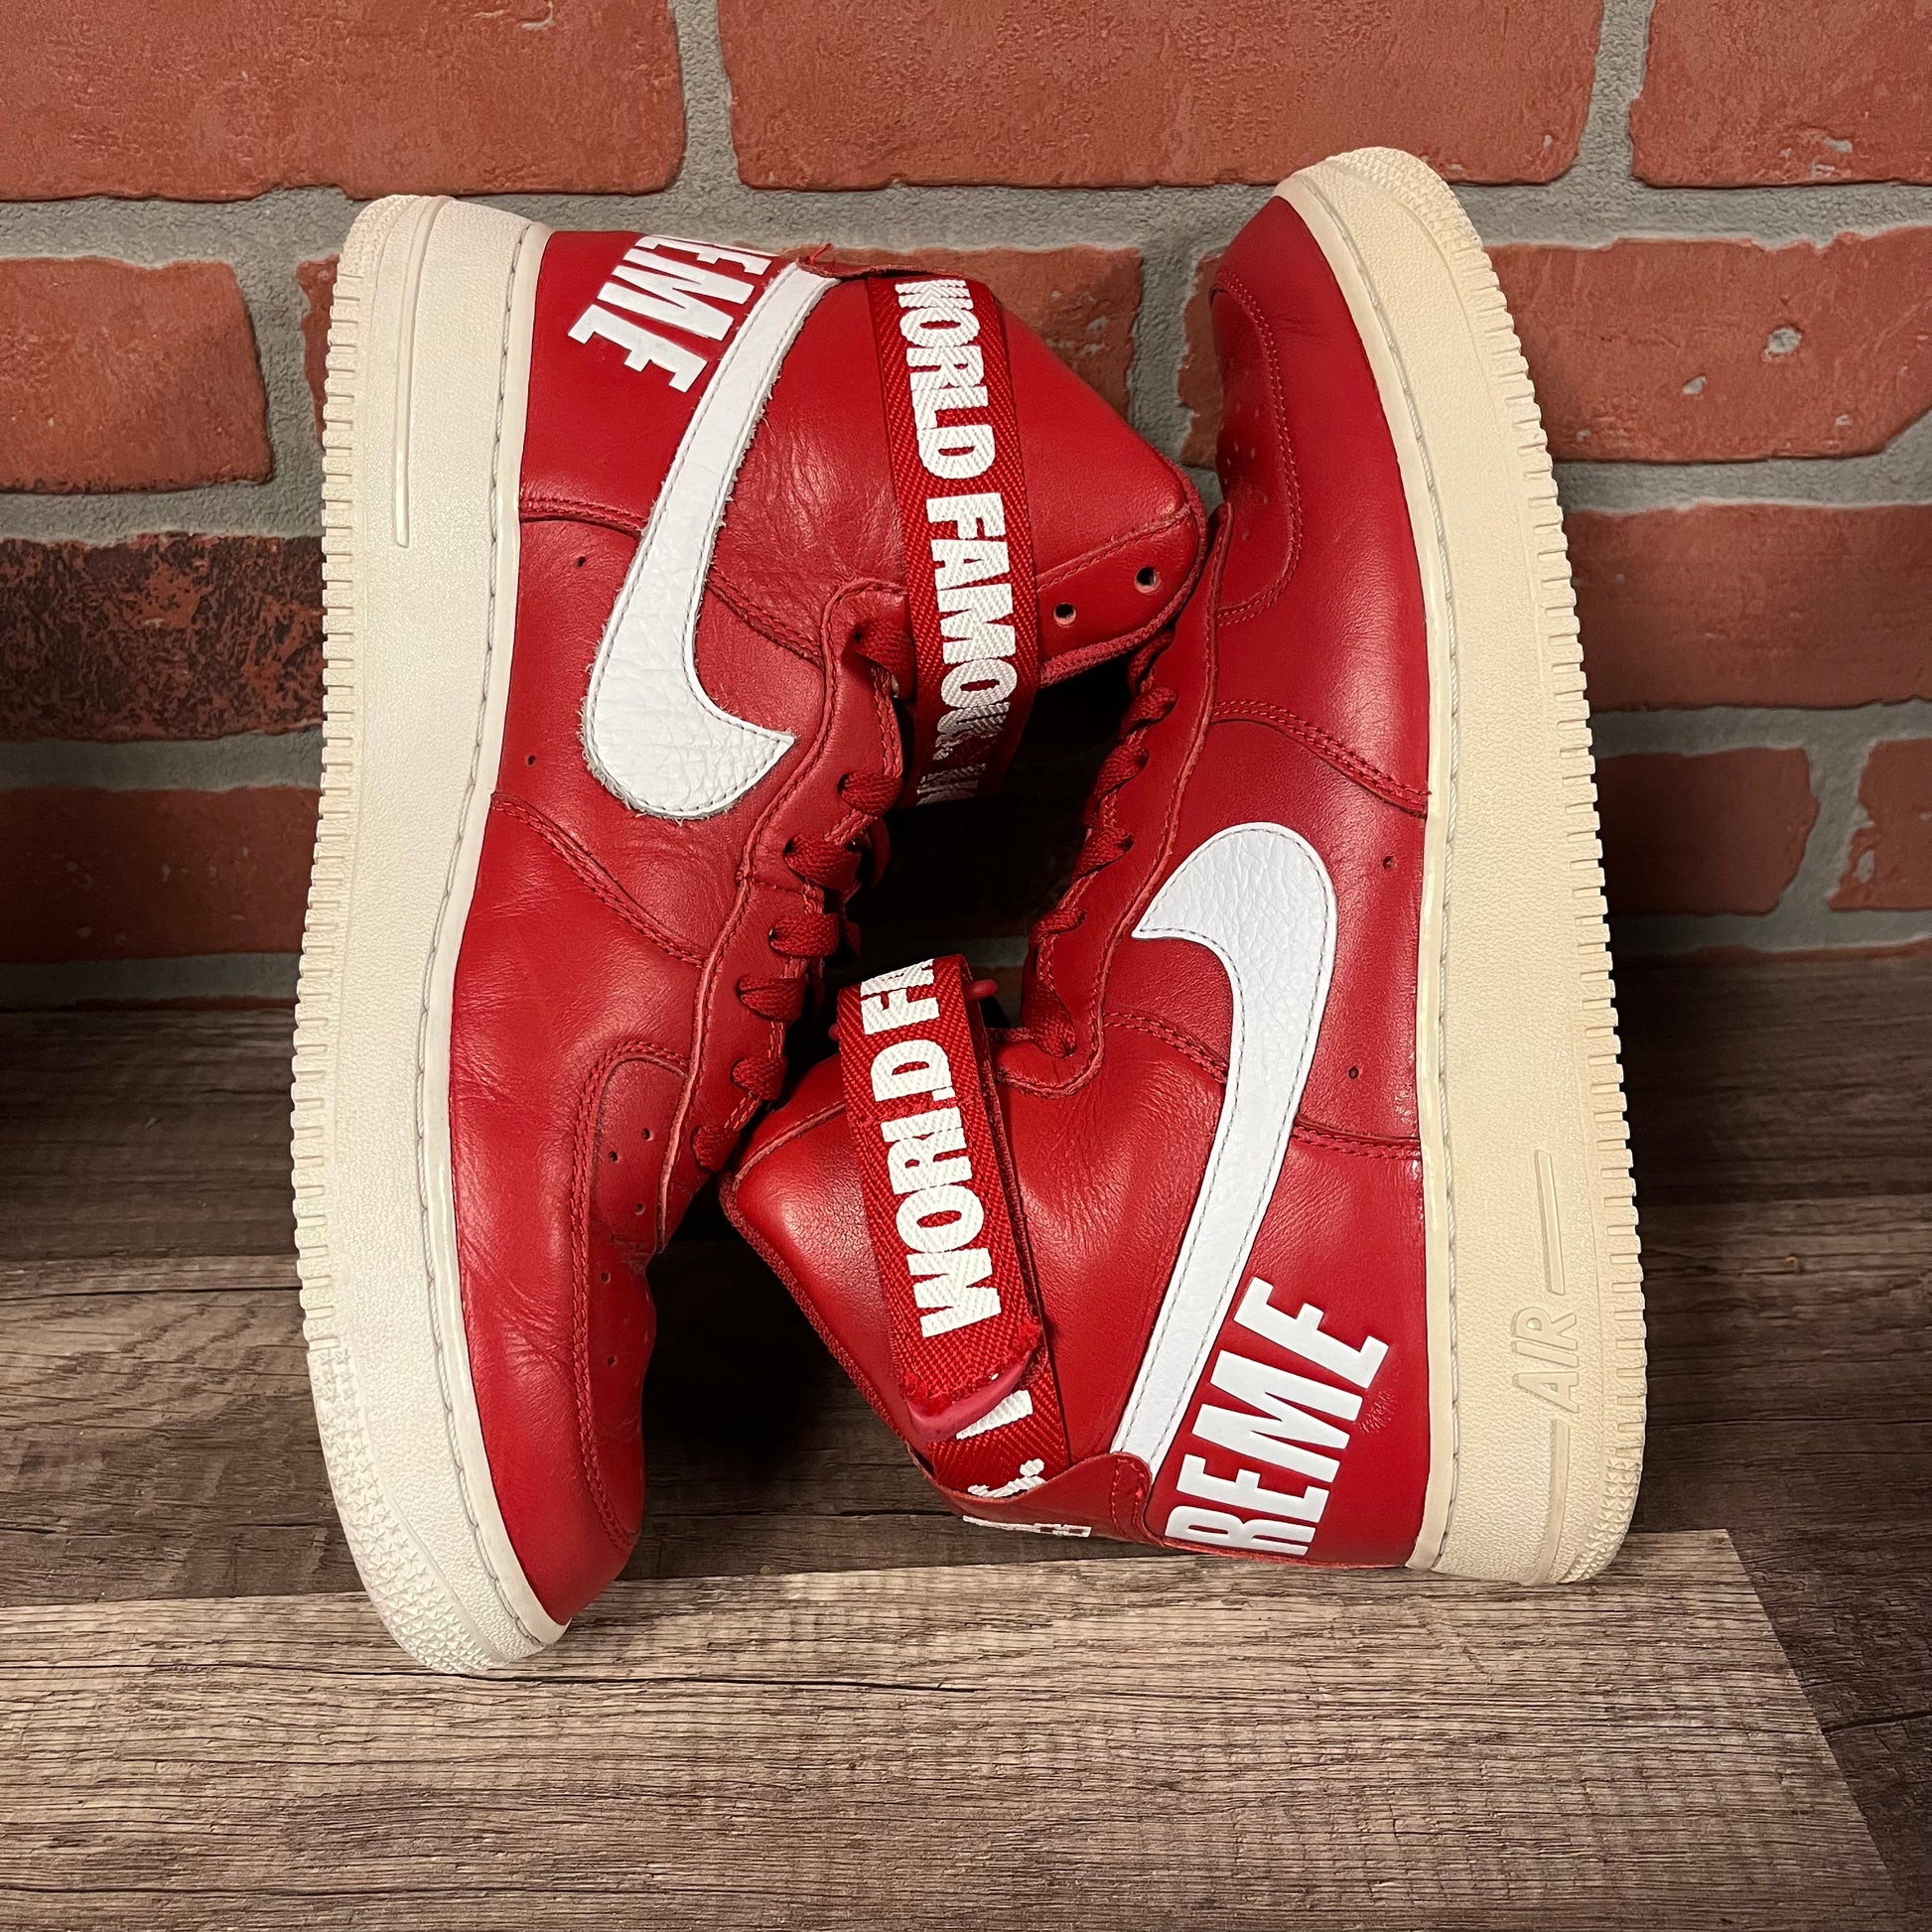 Nike X Supreme Air Force 1 High Sneakers - Red for Men